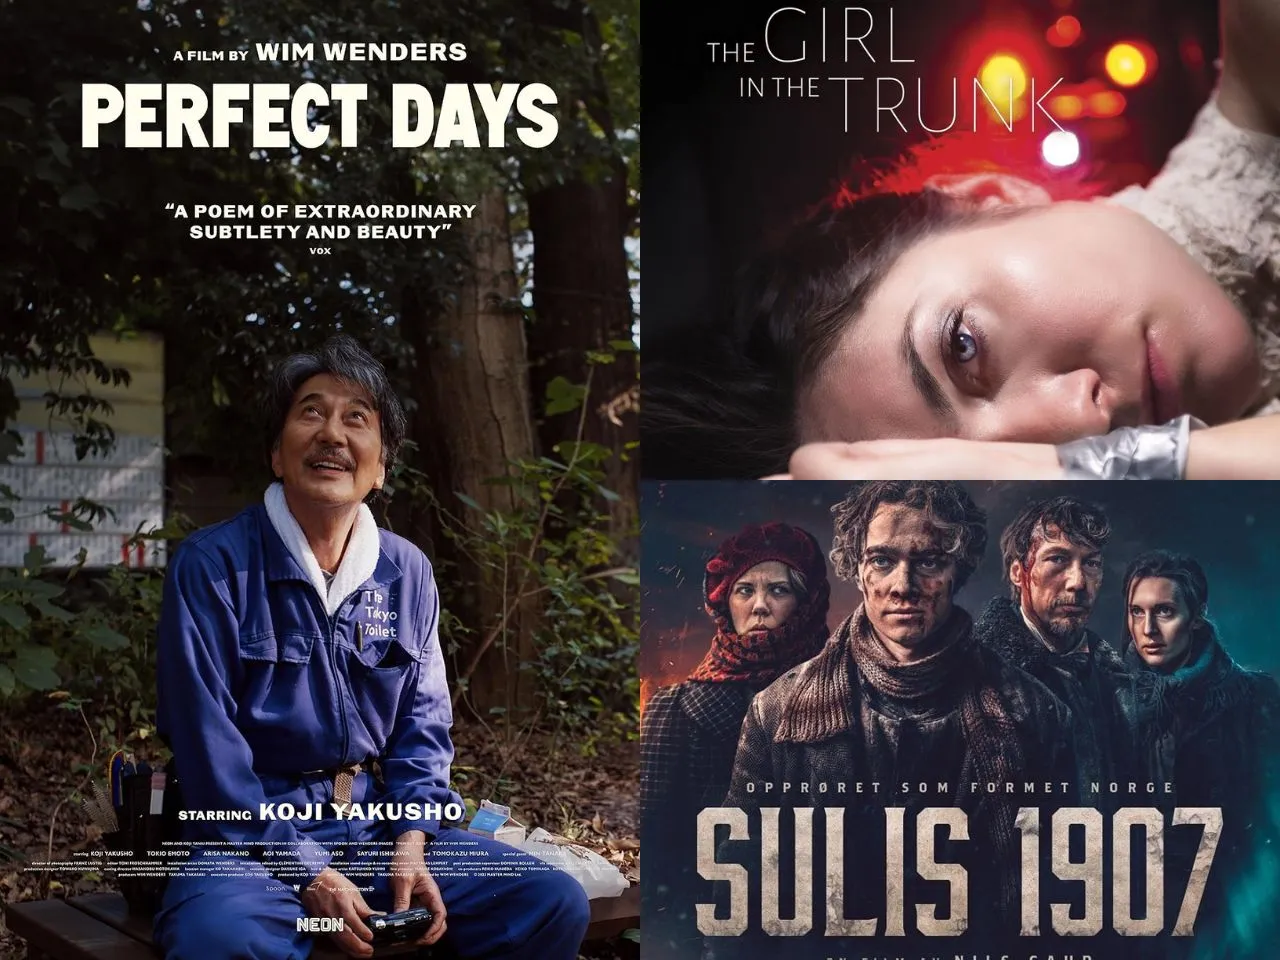 Red Lorry Day 02: Perfect Days' charm, Sulis 1907's revolt, and The Girl in the Trunk's horror